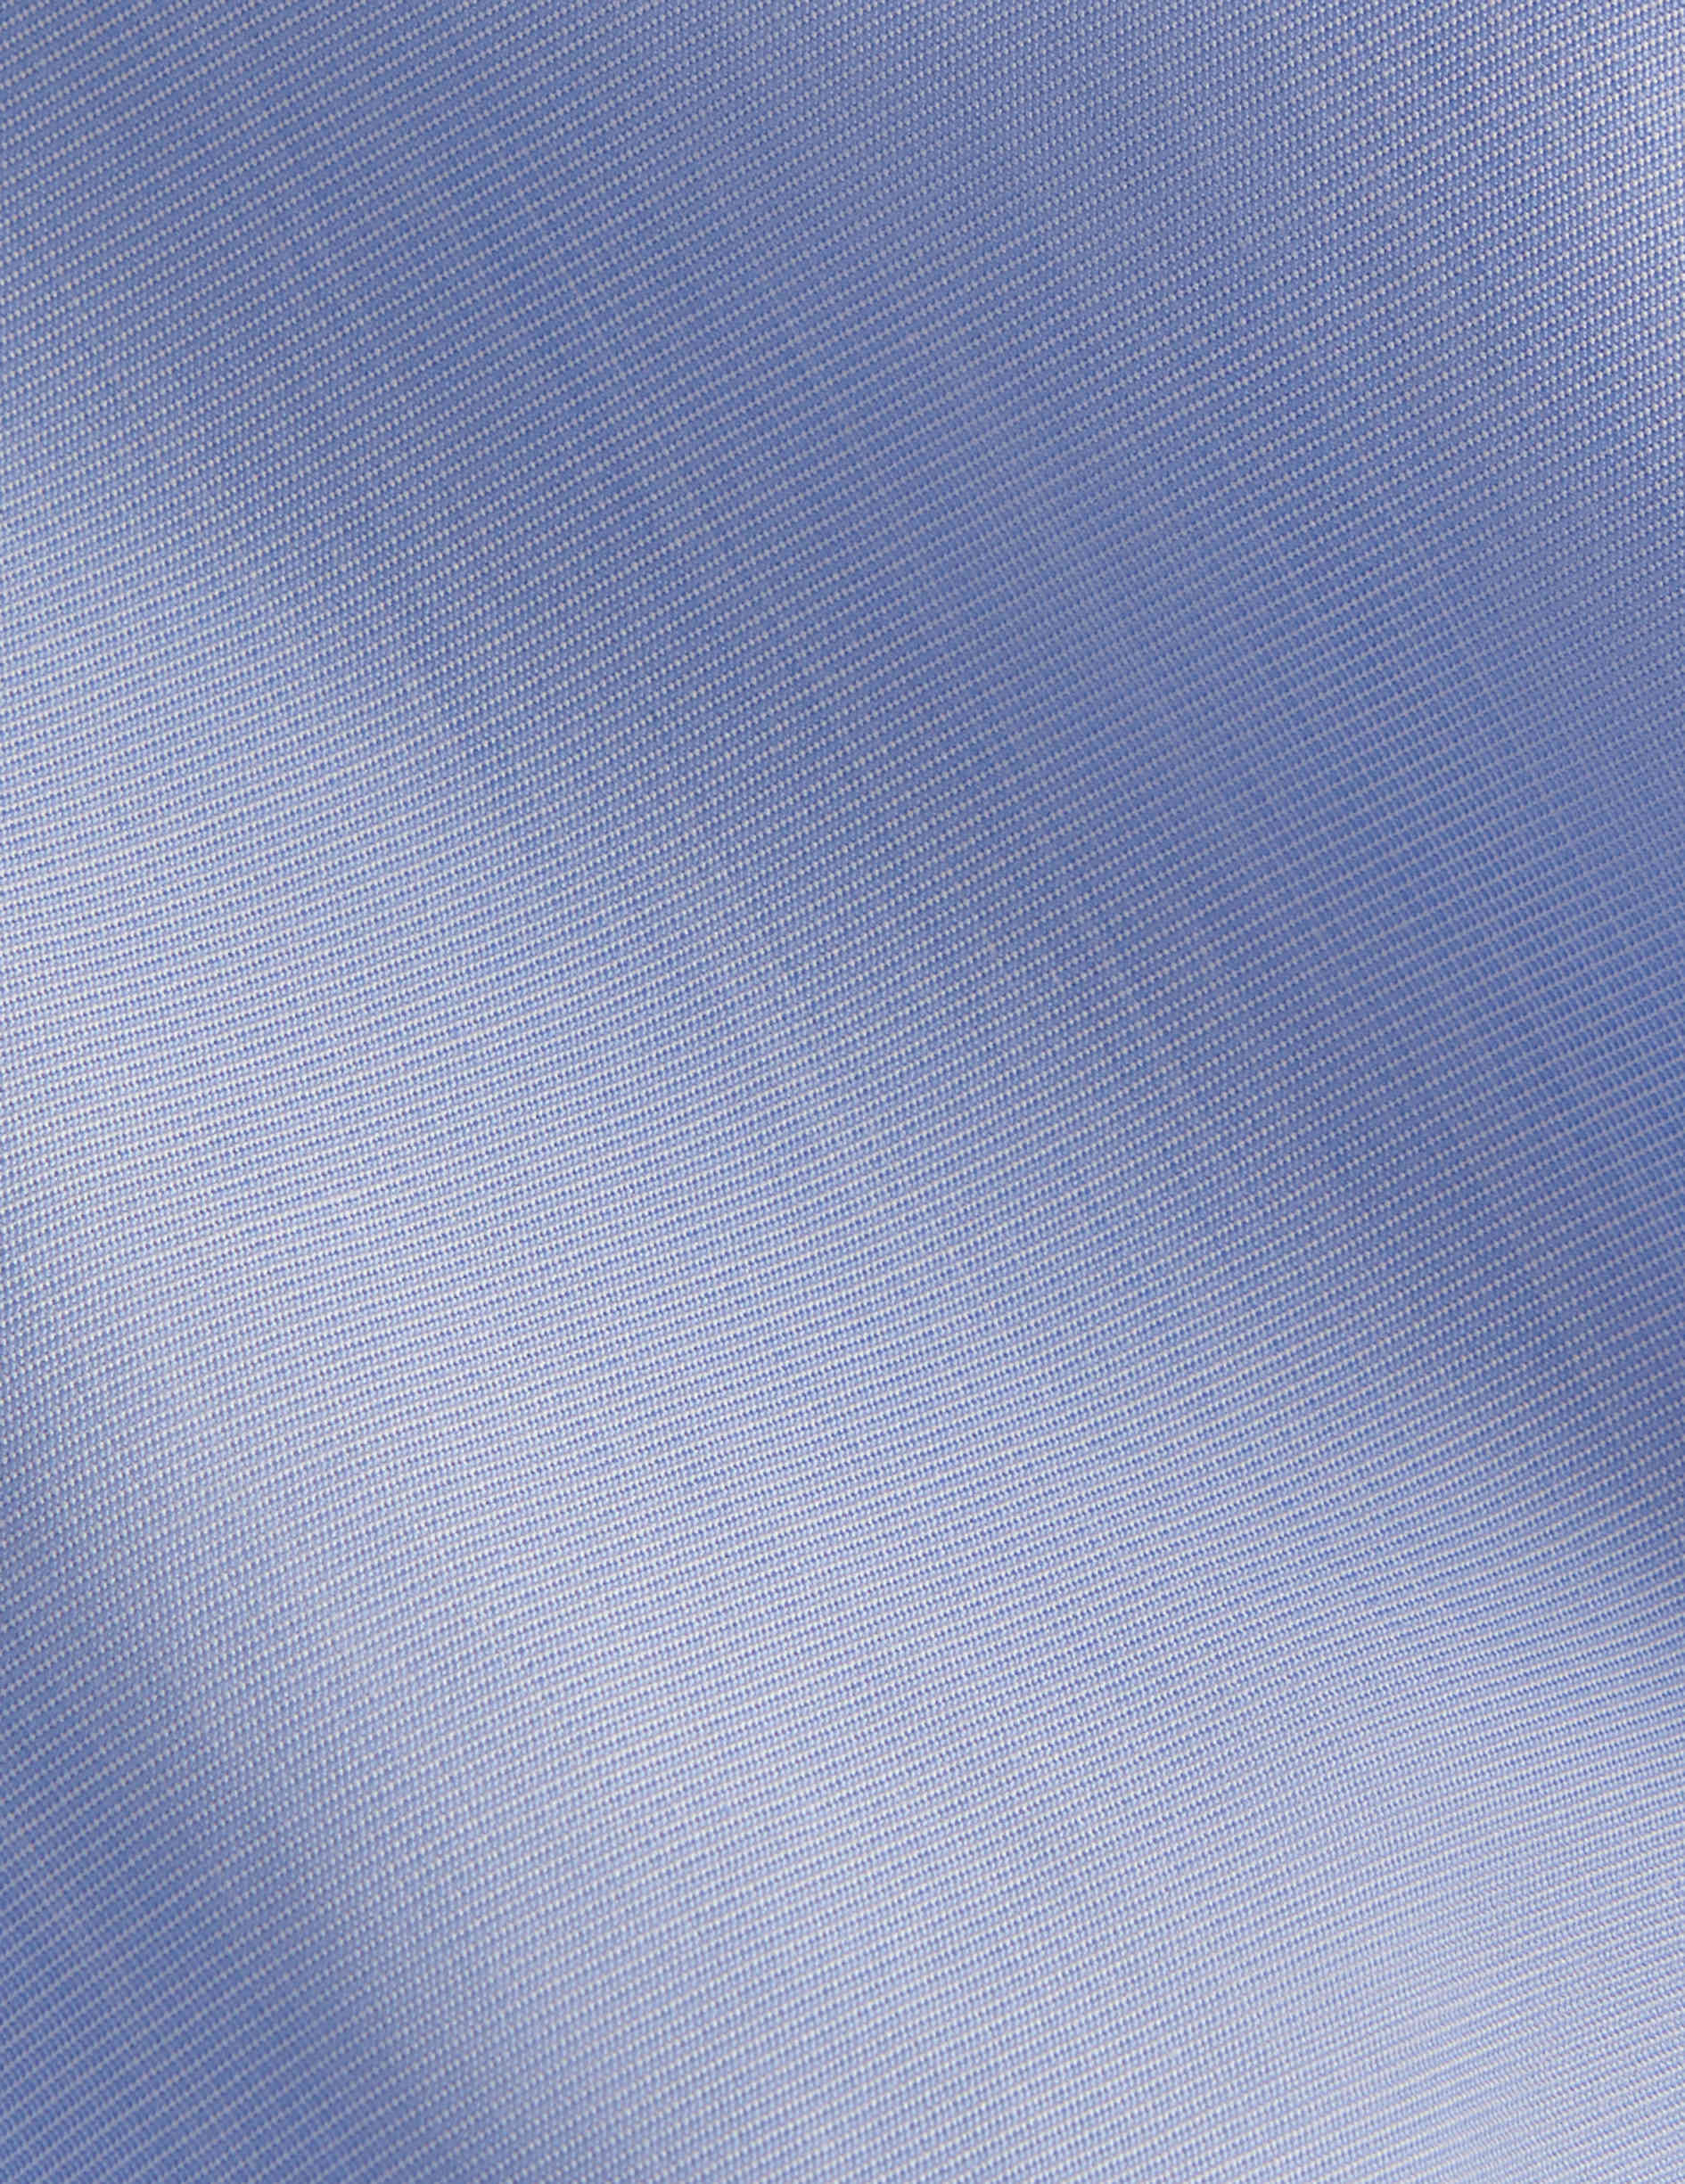 Semi-Fitted blue wrinkle-free shirt - Wire to wire - Figaret Collar